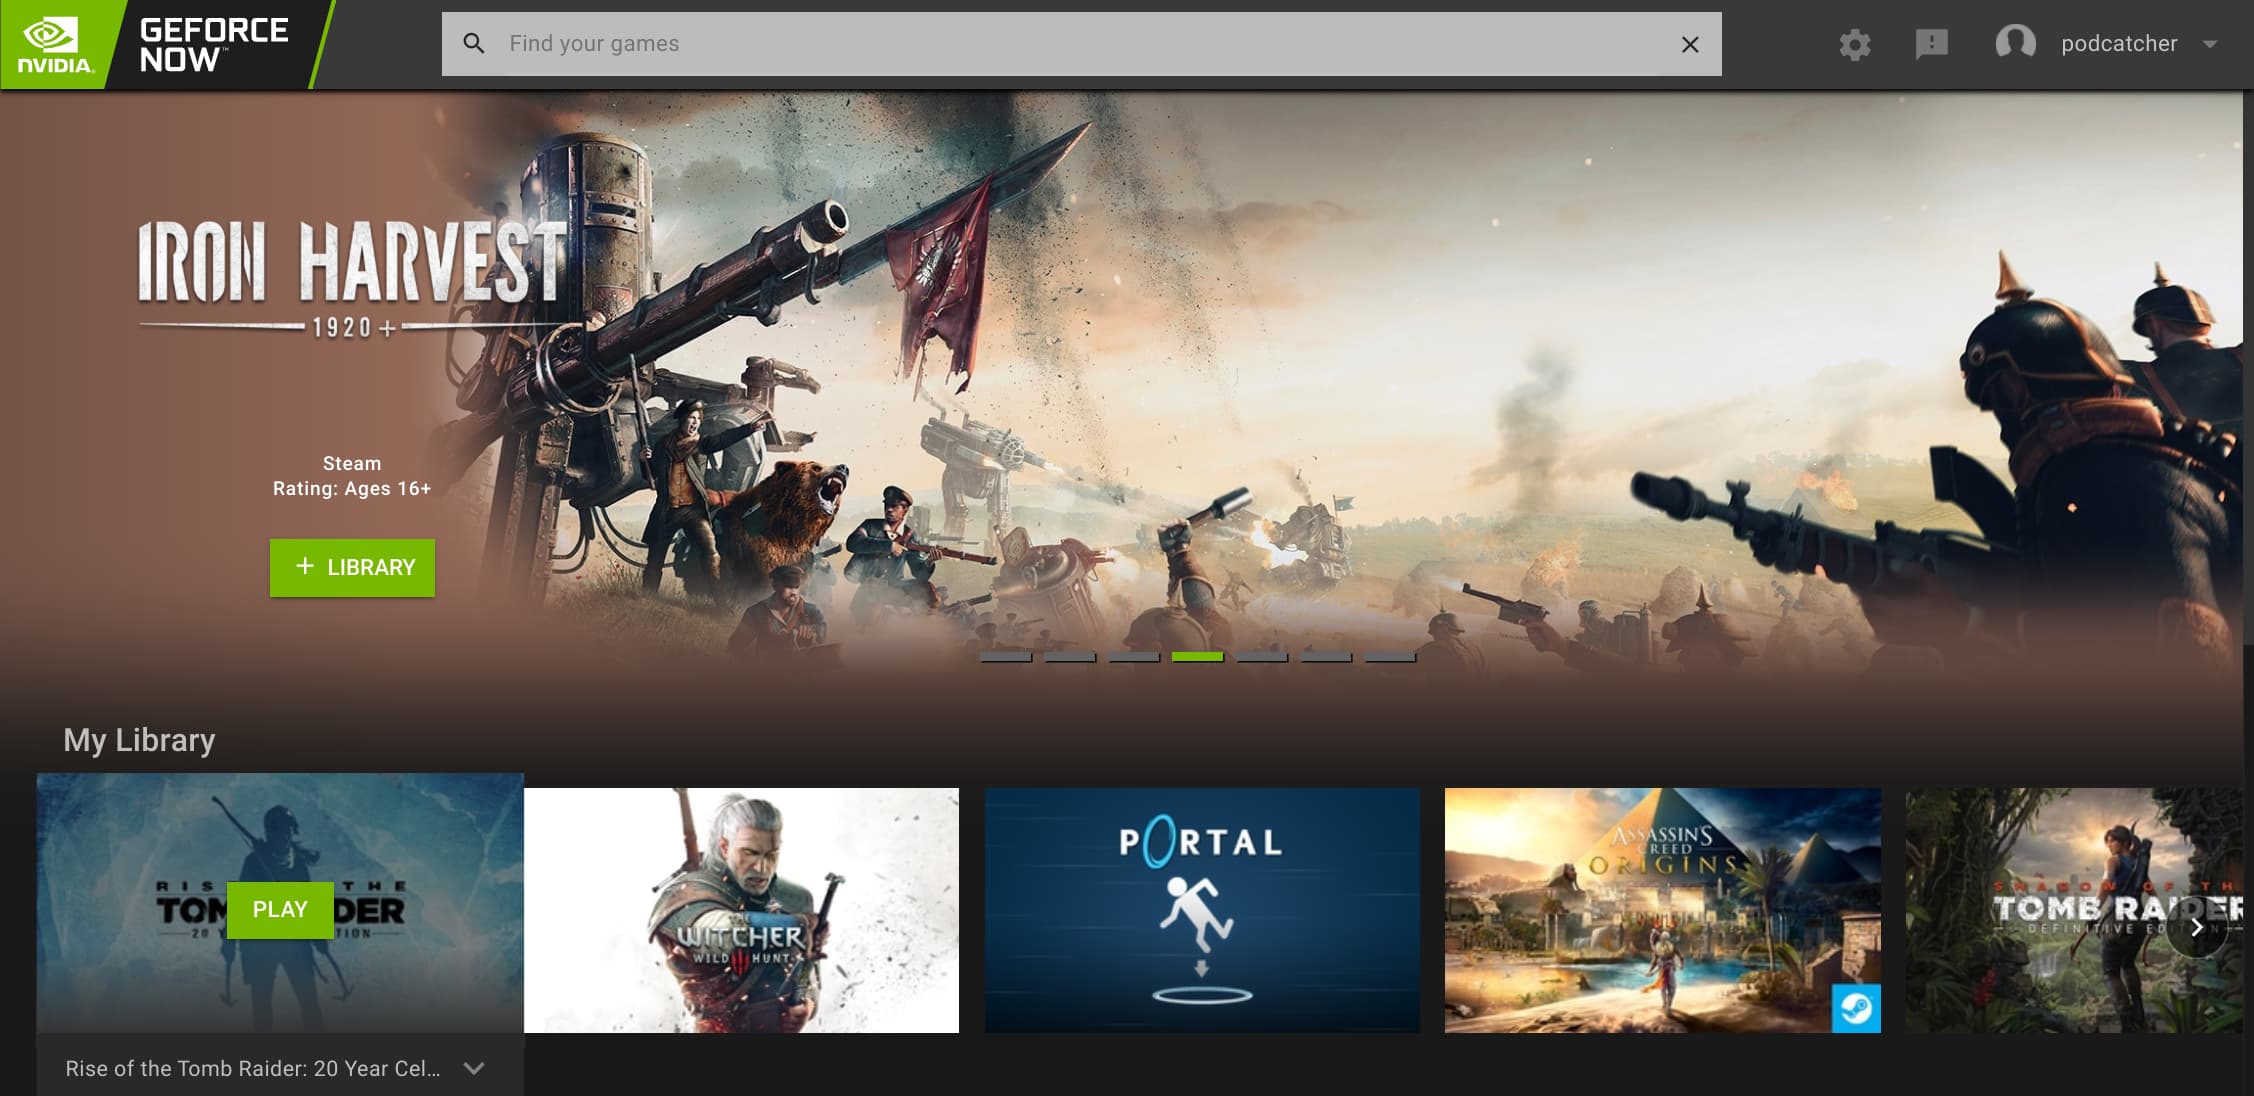 Chrome OS 98 may offer a glimpse at Steam gaming on Chromebooks